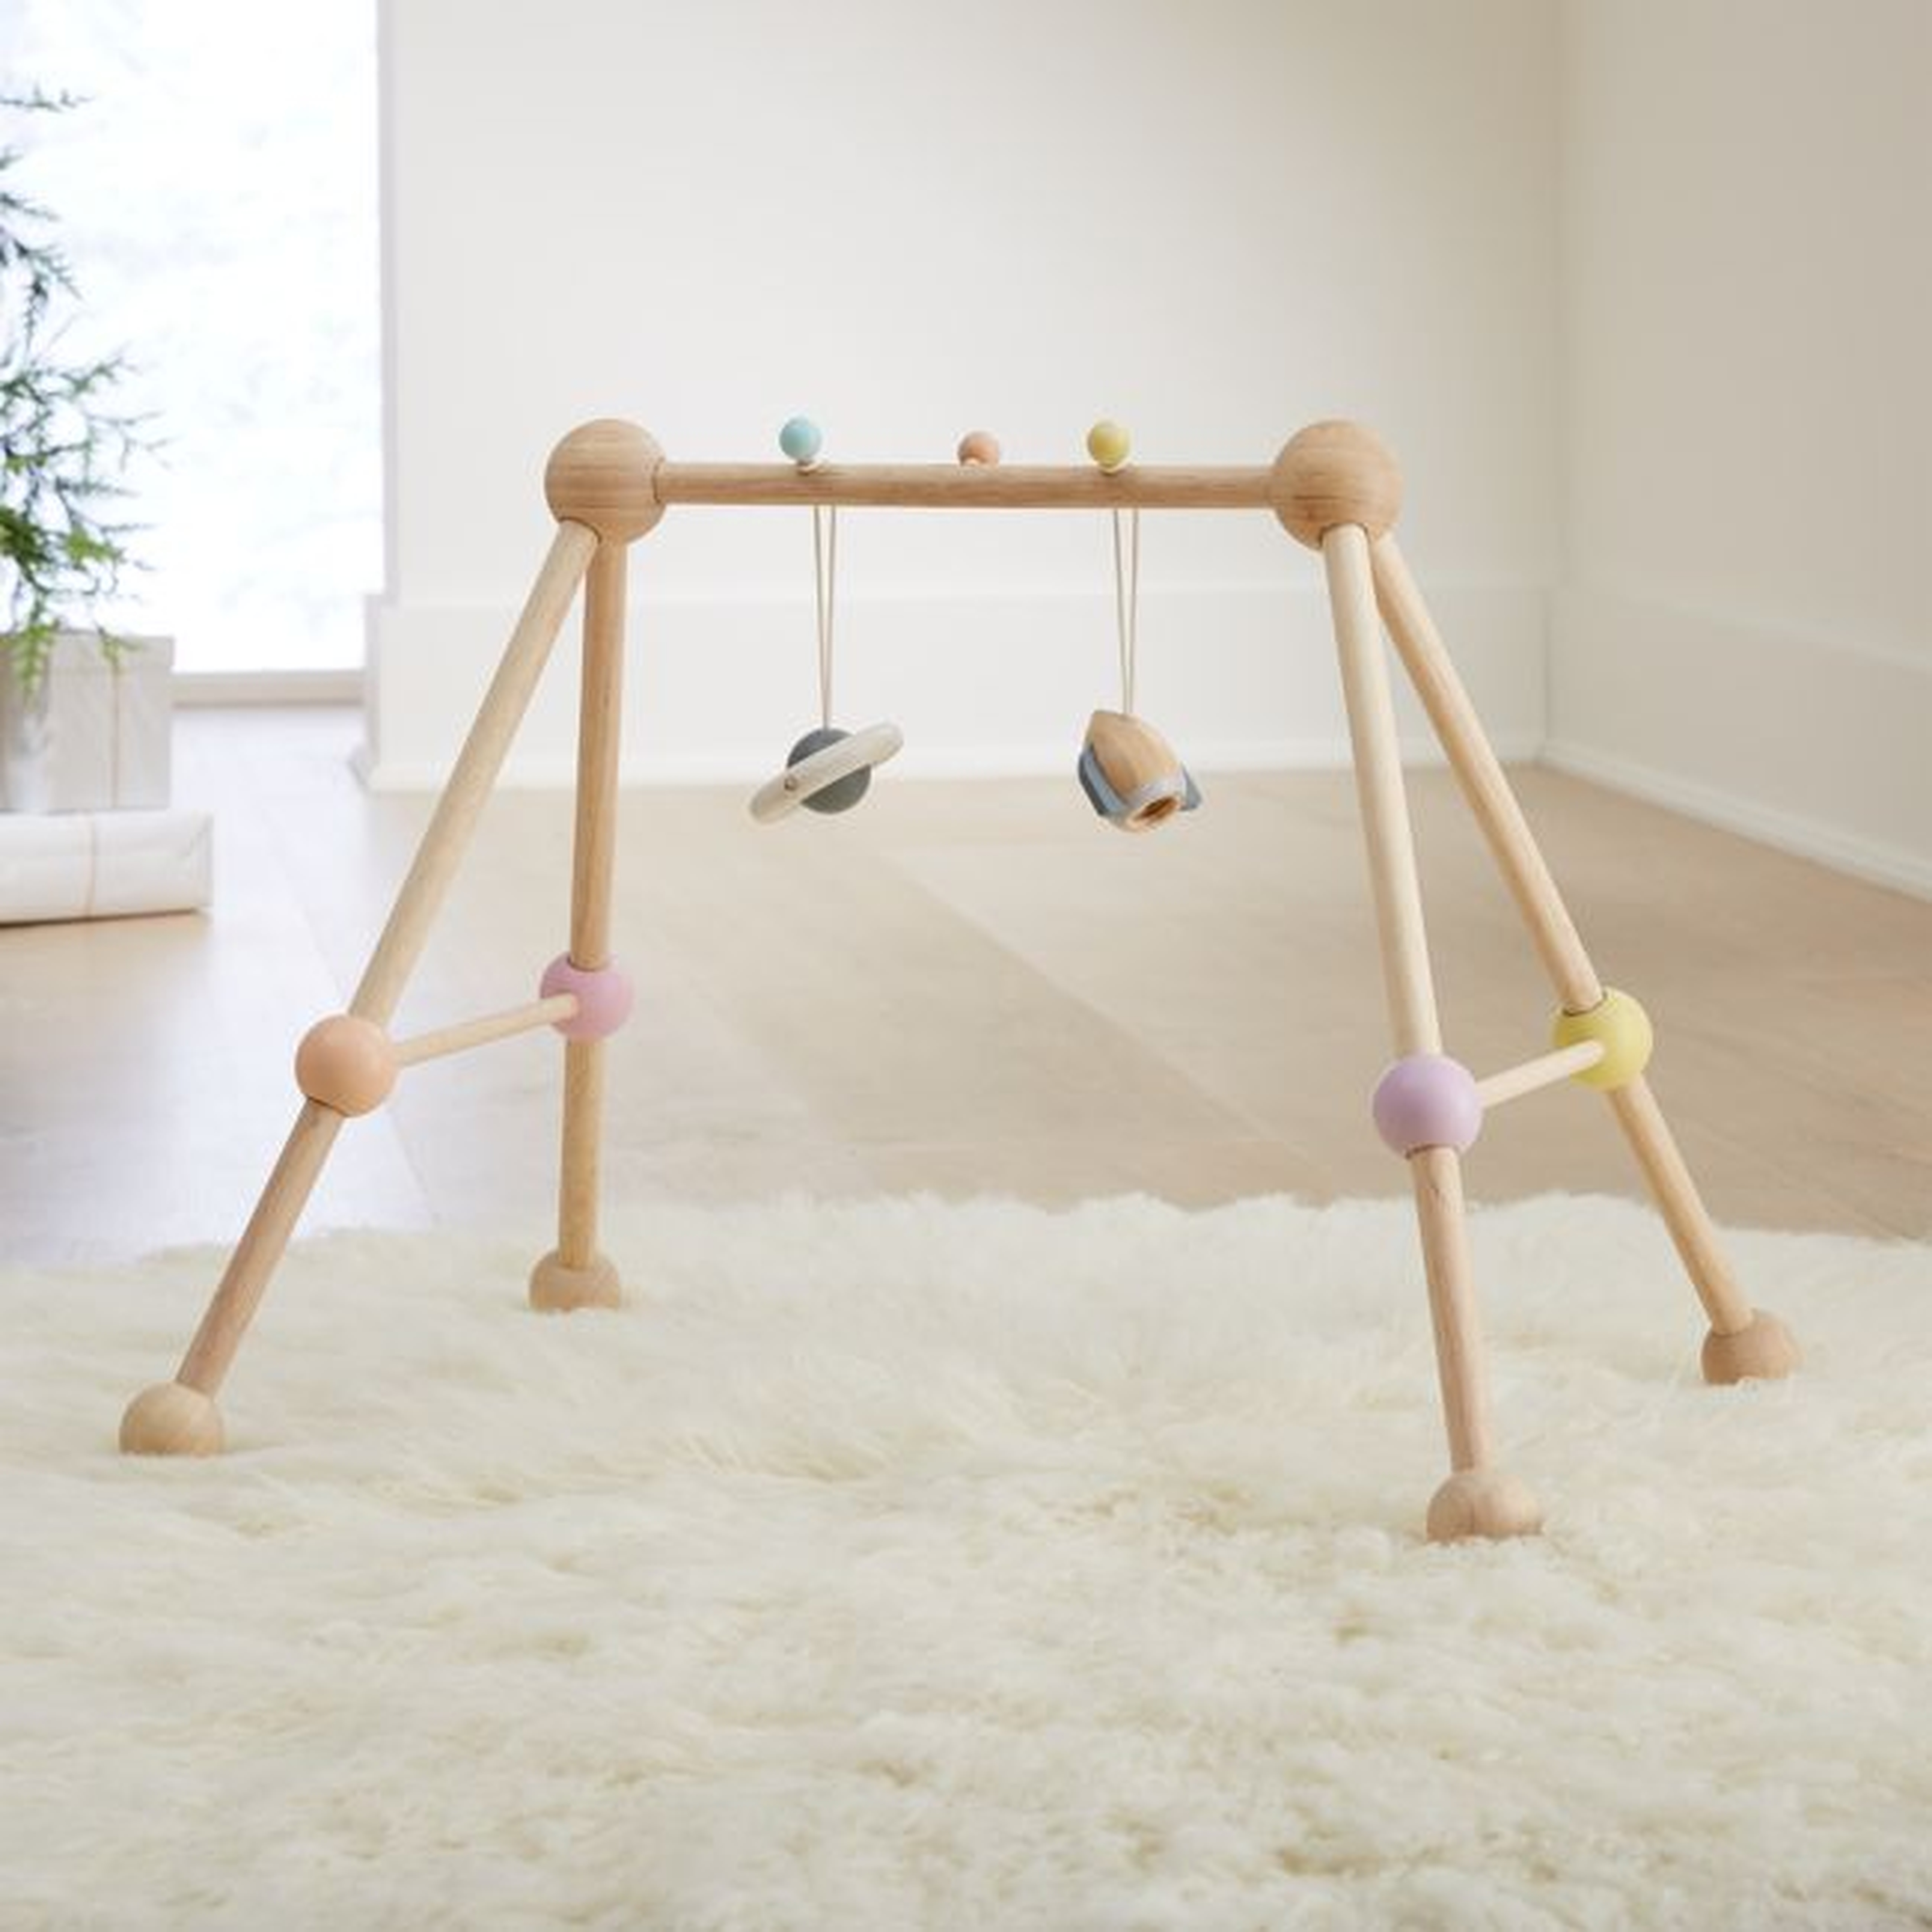 Plan Toys Wooden Baby Play Gym - Crate and Barrel